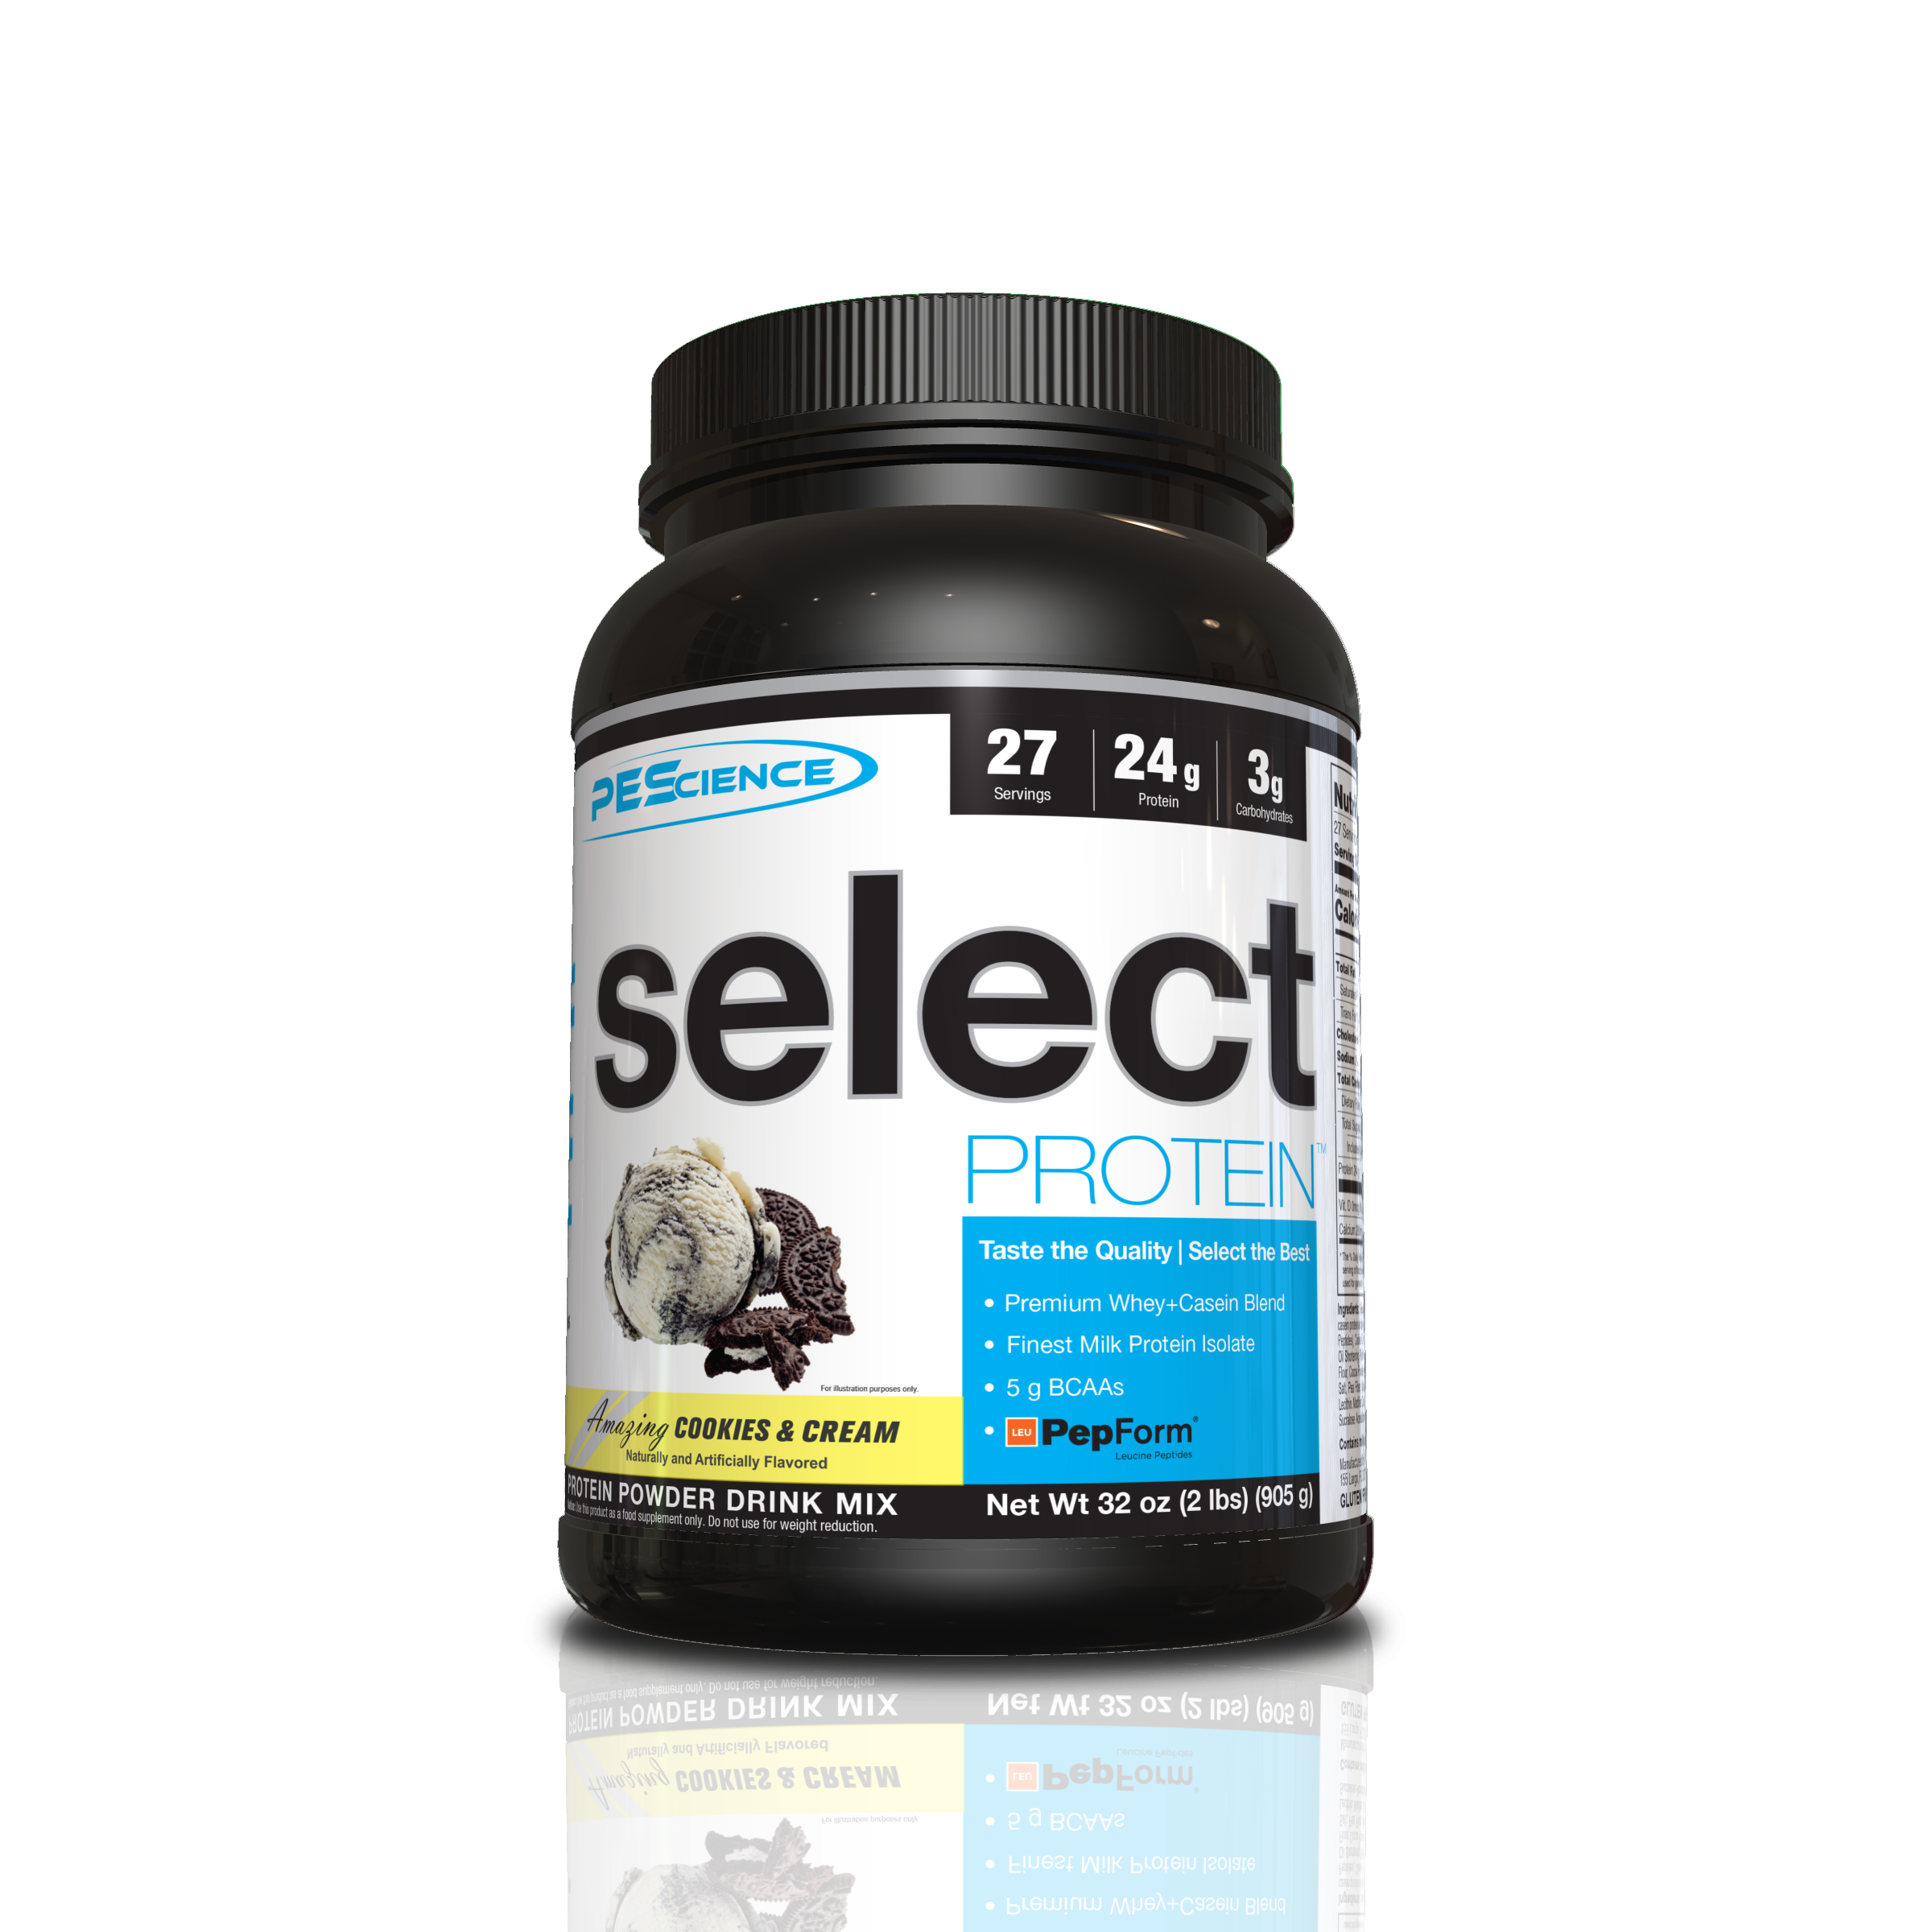 PEScience Select Protein (27 servings) pescience-select-protein-30-servings Whey Protein Blend Cookies & Cream PEScience